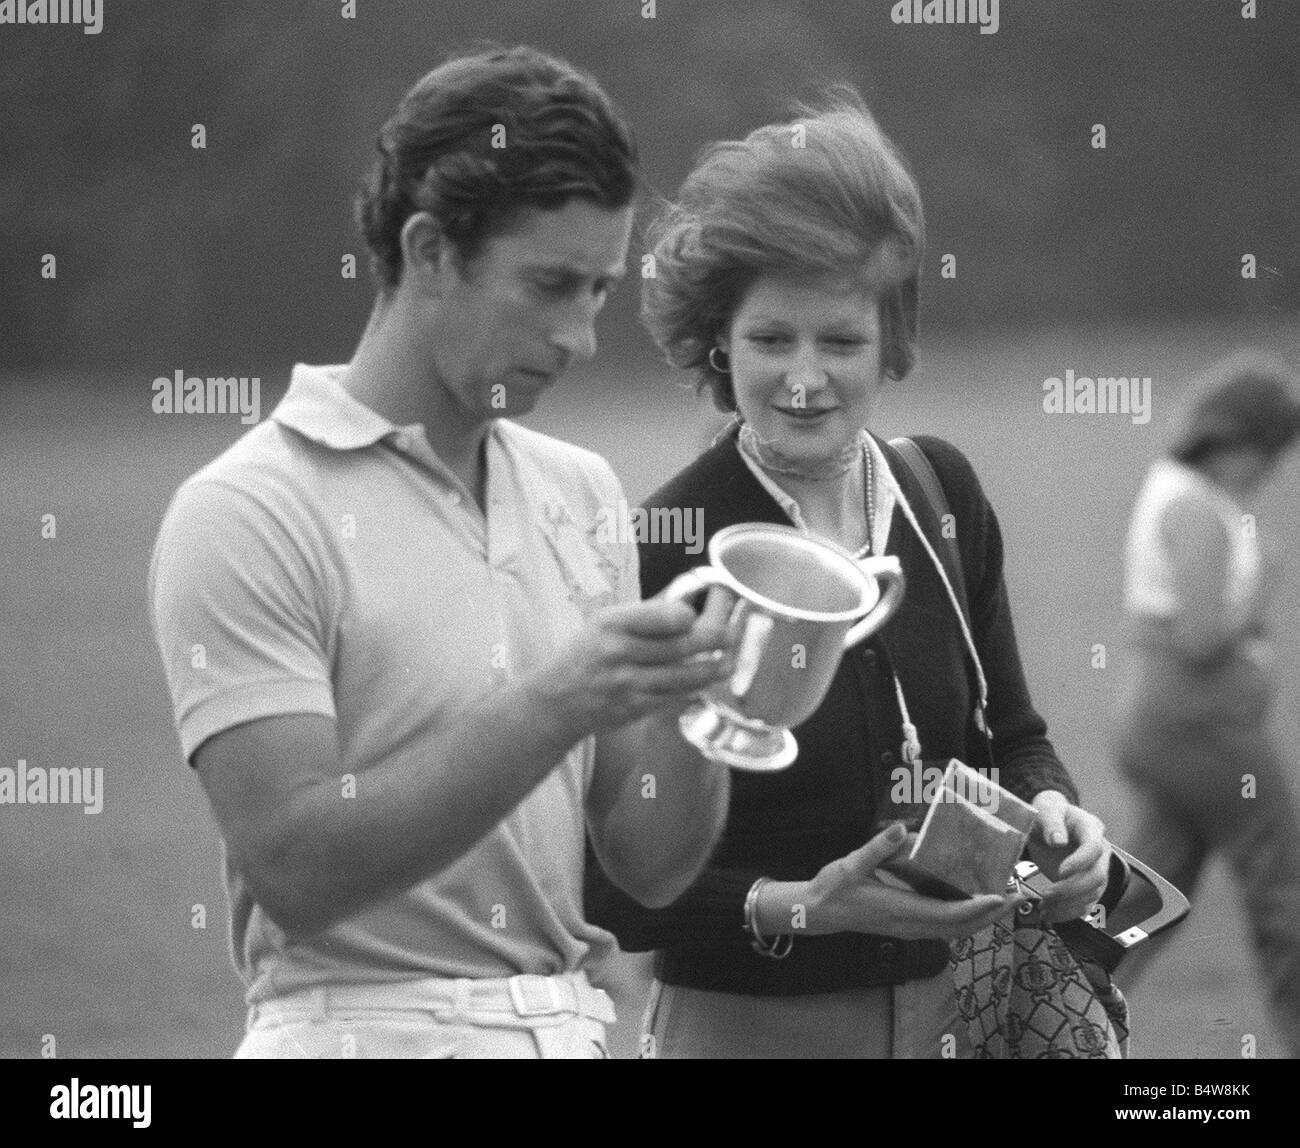 prince-charles-with-lady-sarah-spencer-at-cowdrey-park-where-he-played-B4W8KK.jpg